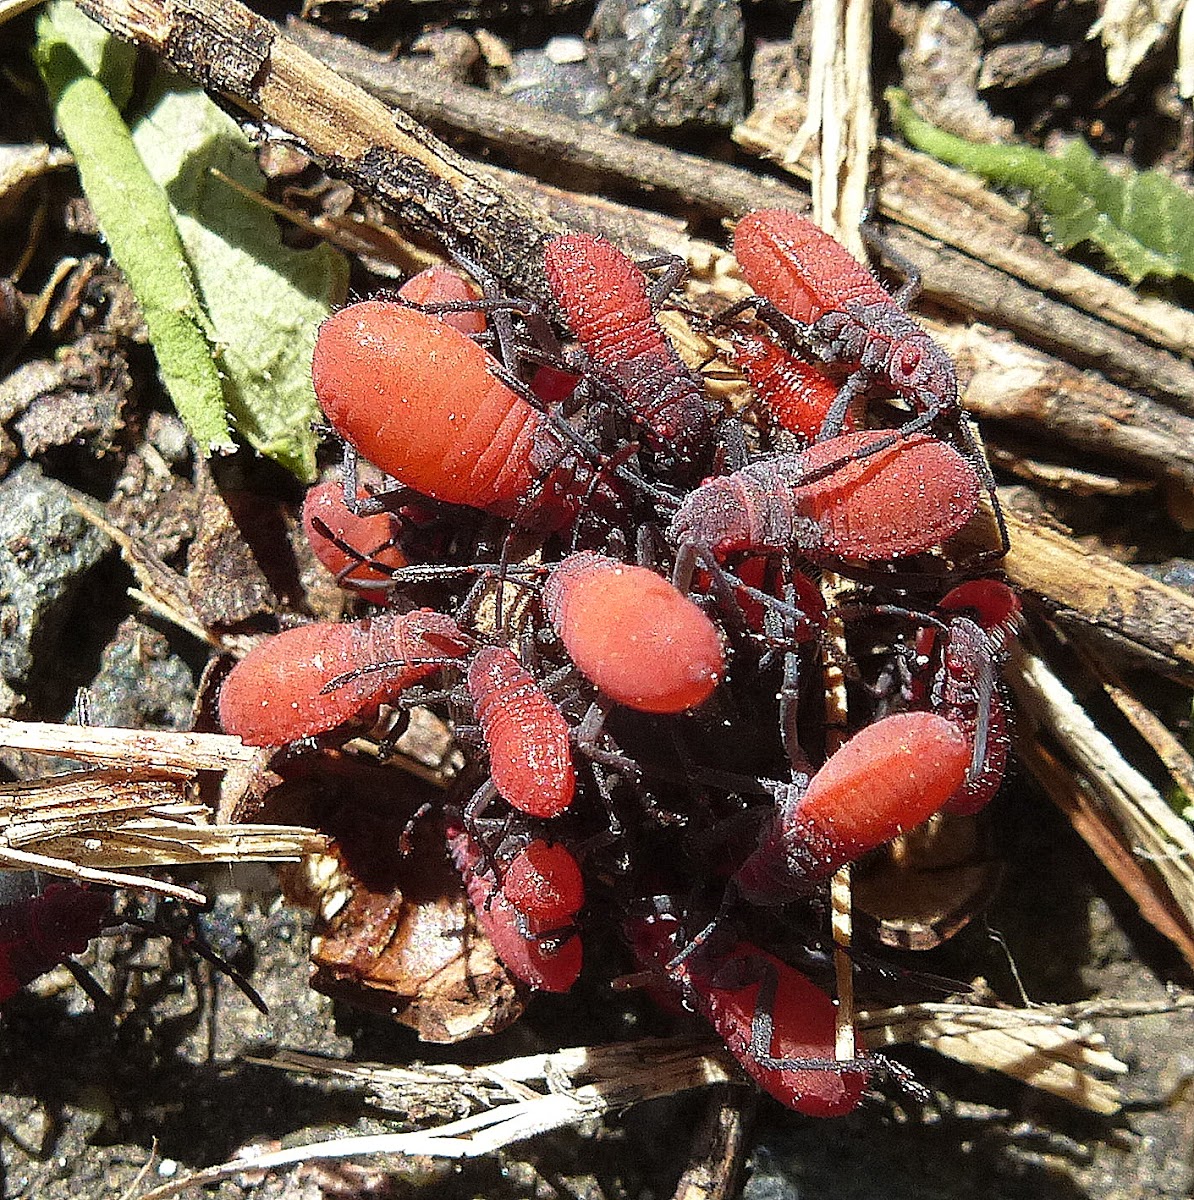 Red Shouldered Bugs